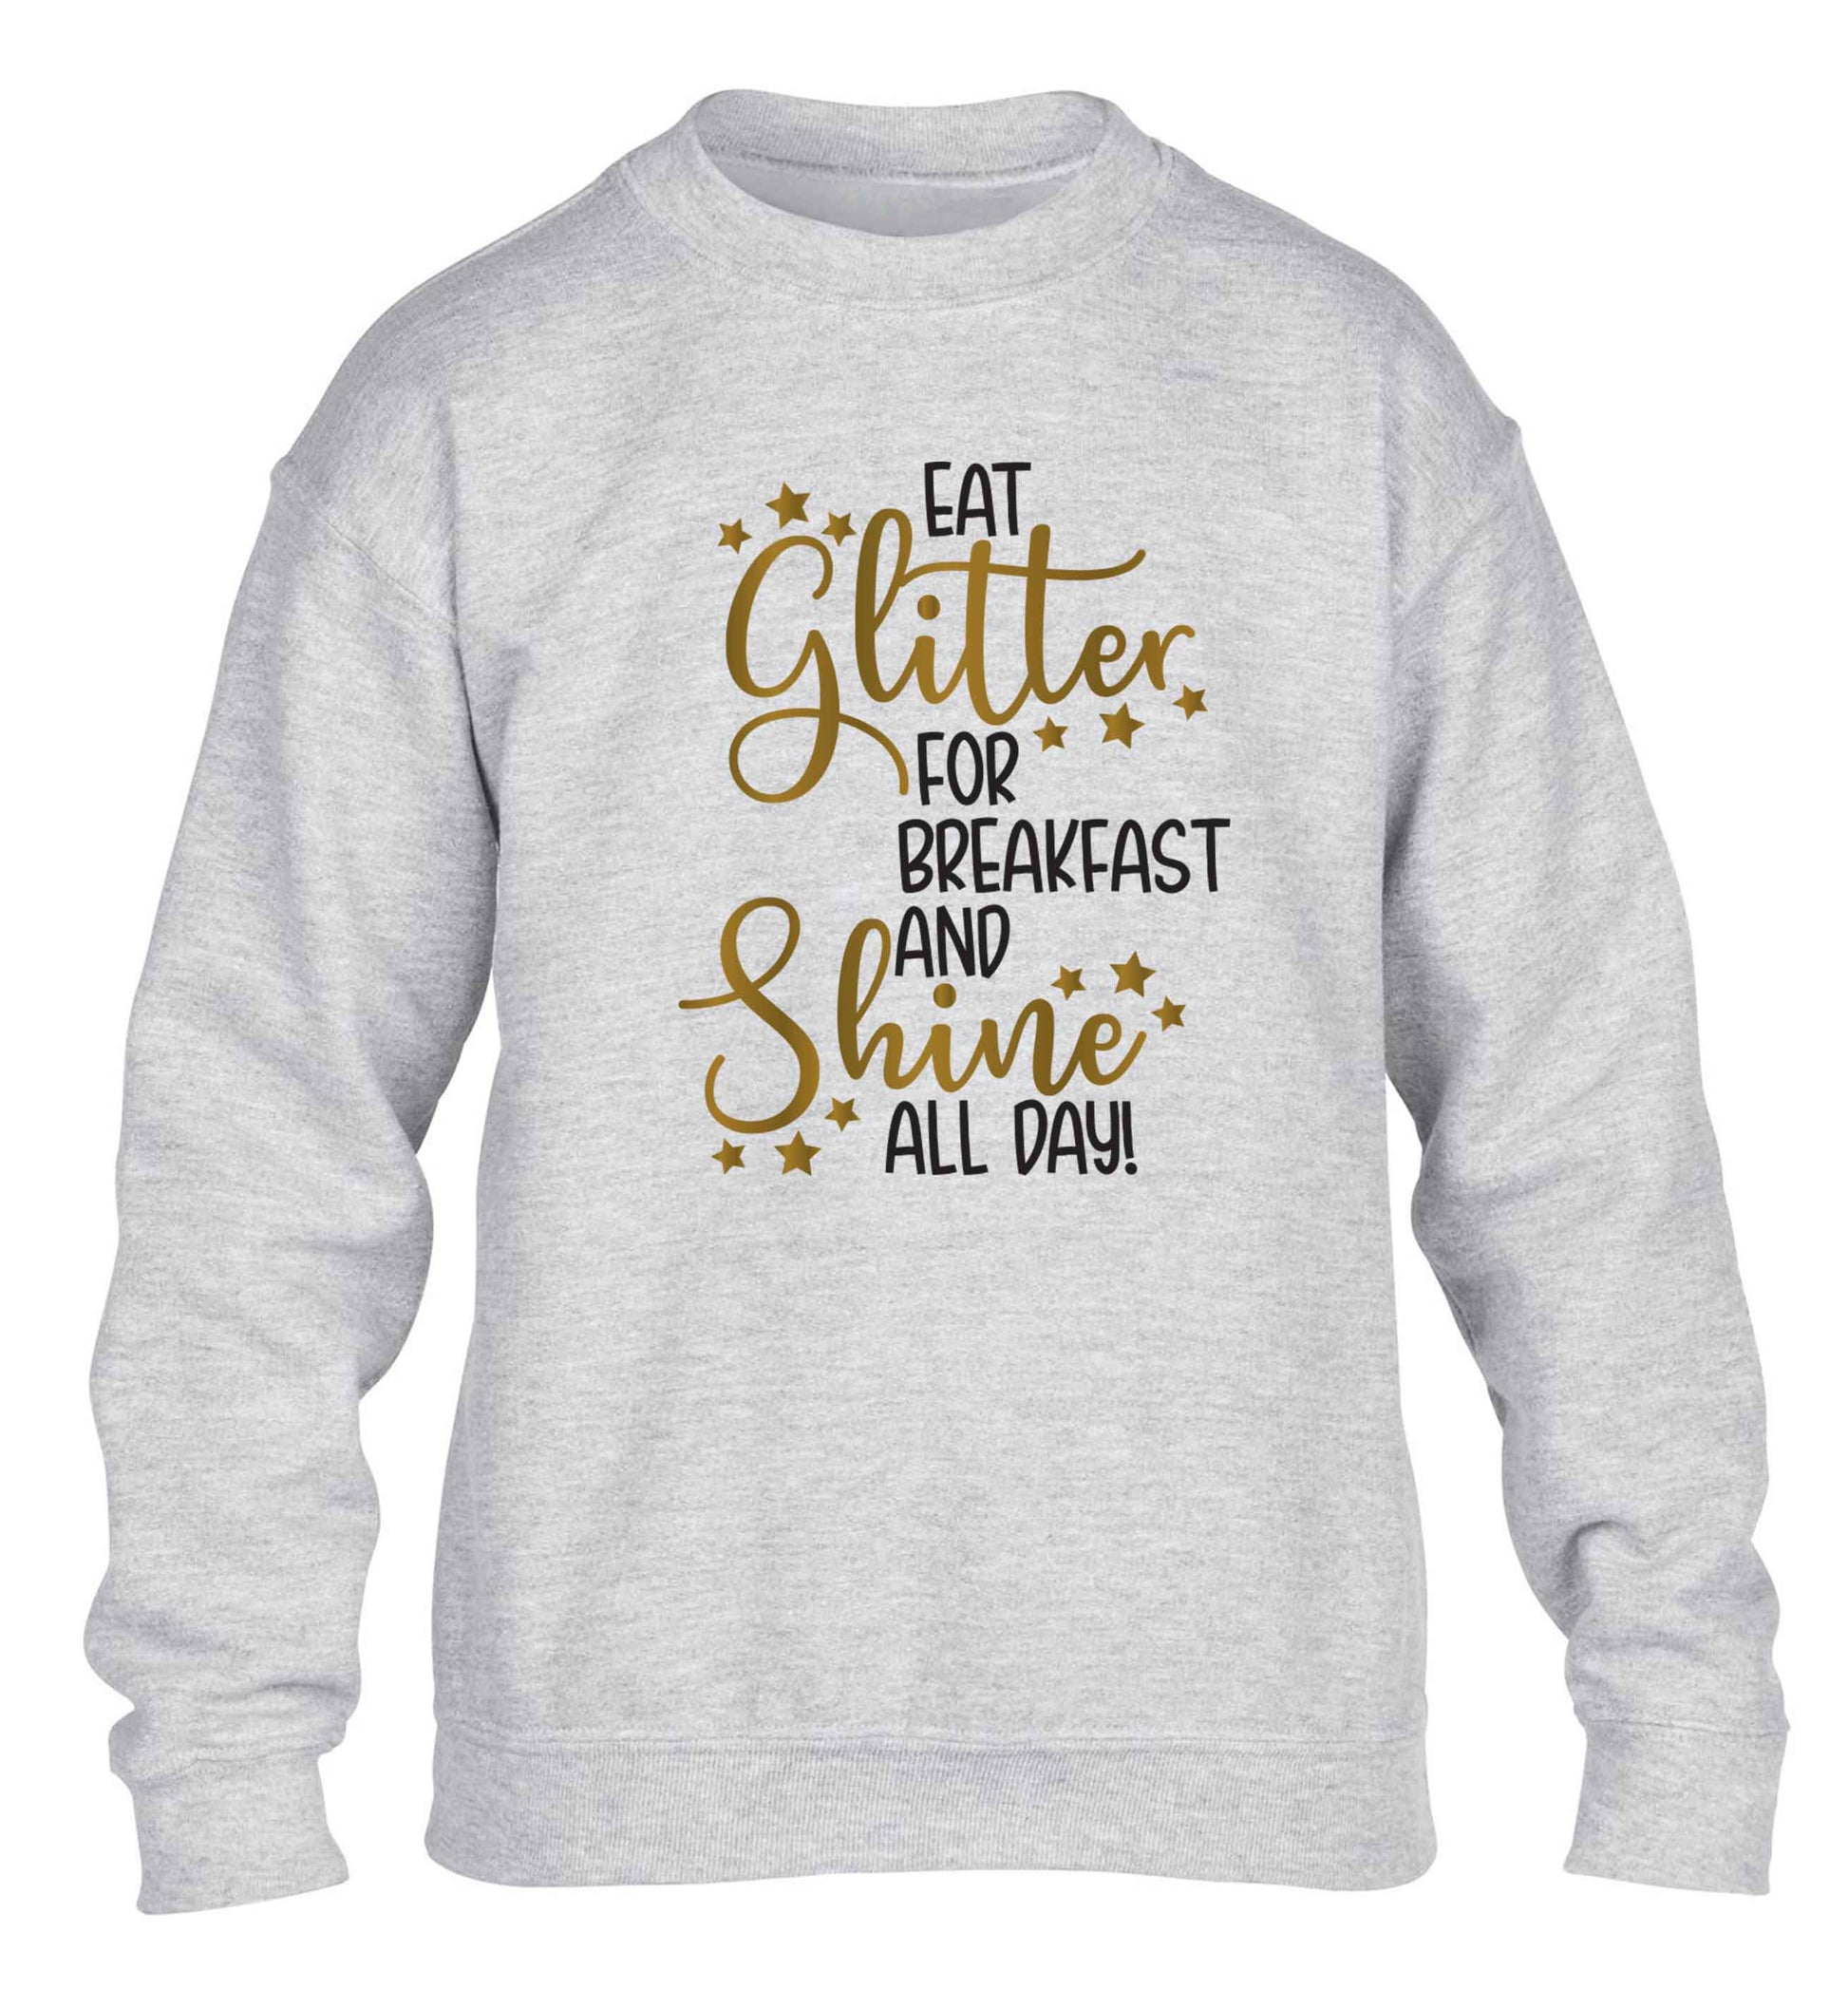 Eat glitter for breakfast and shine all day children's grey sweater 12-13 Years